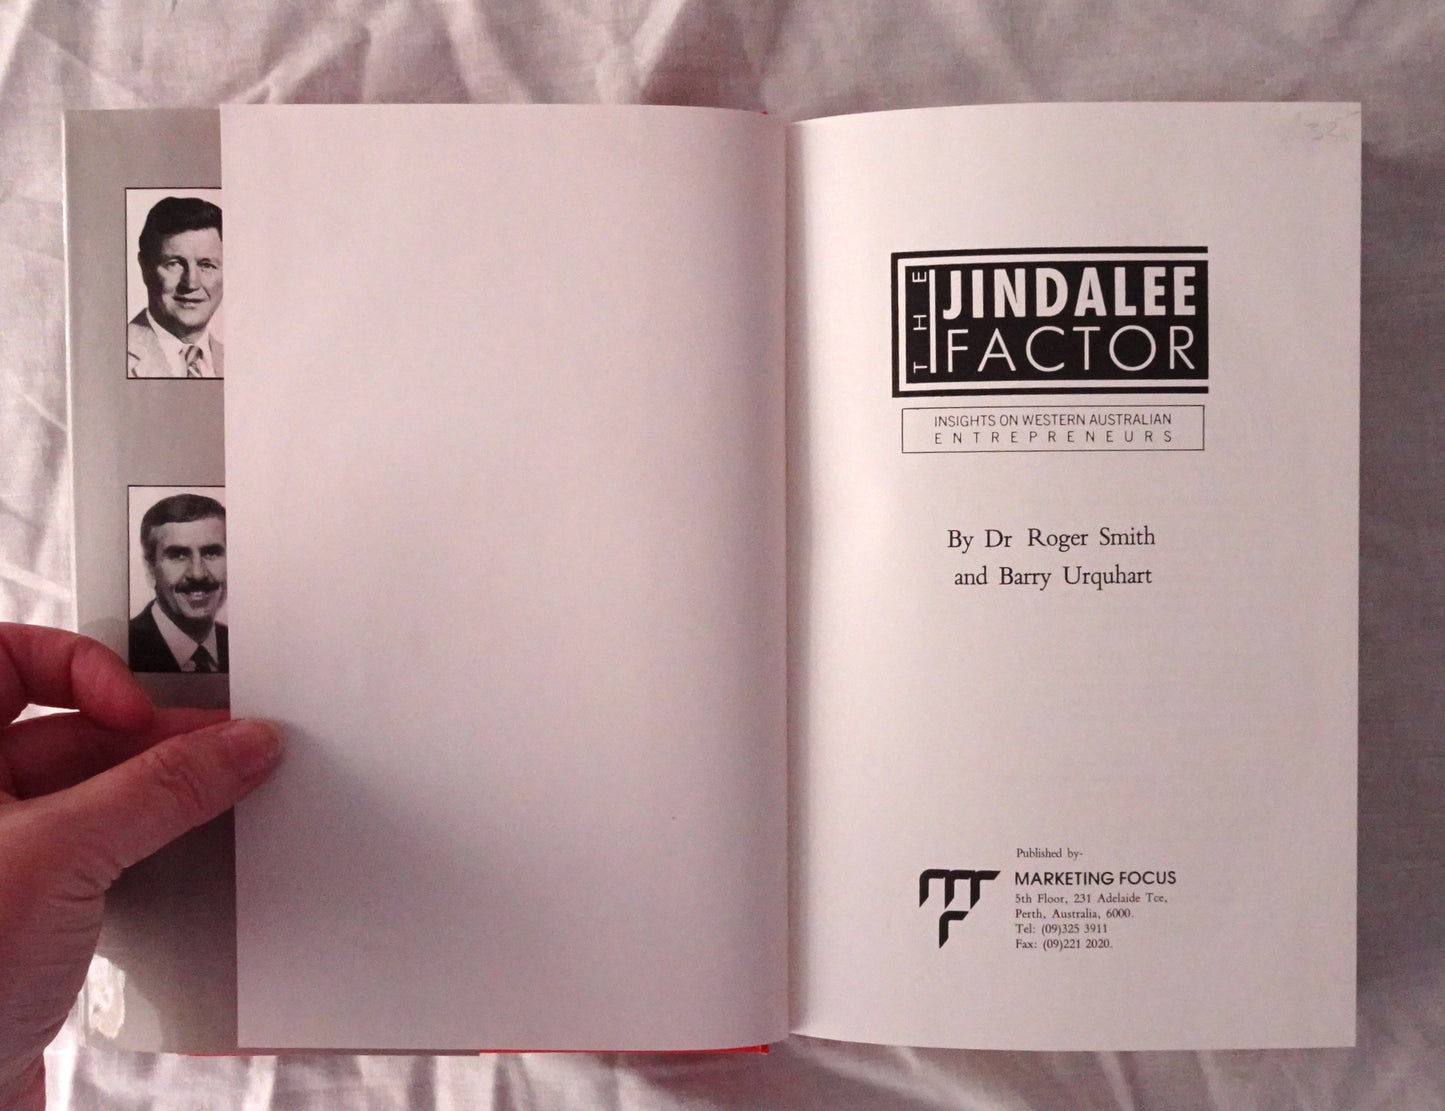 The Jindalee Factor by Dr Roger Smith and Barry Urquhart